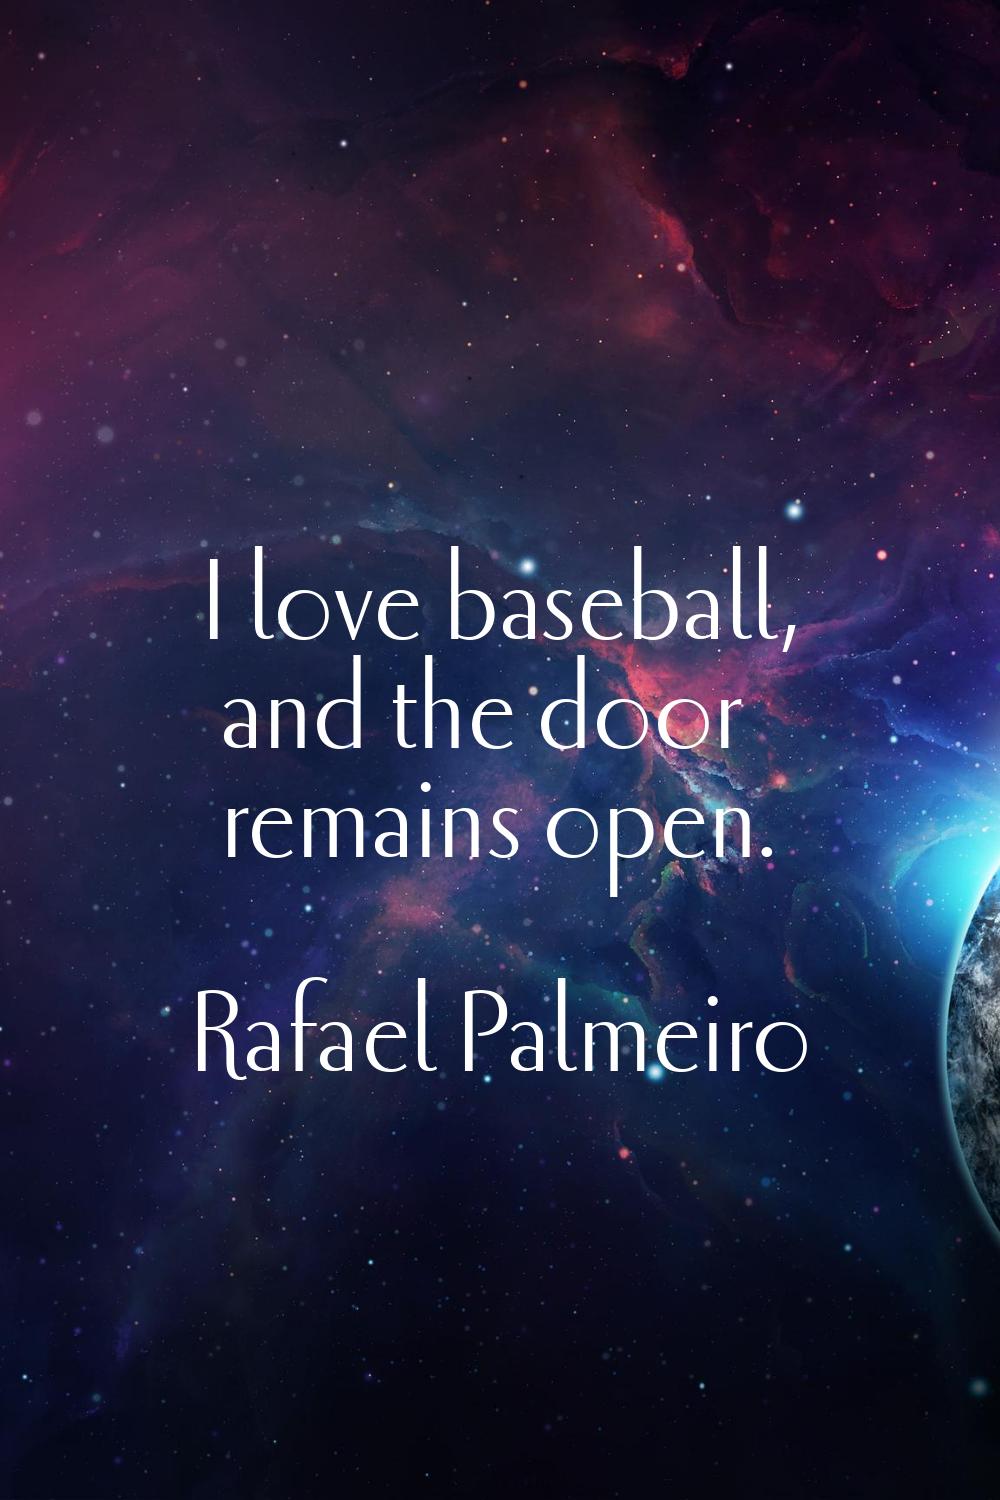 I love baseball, and the door remains open.